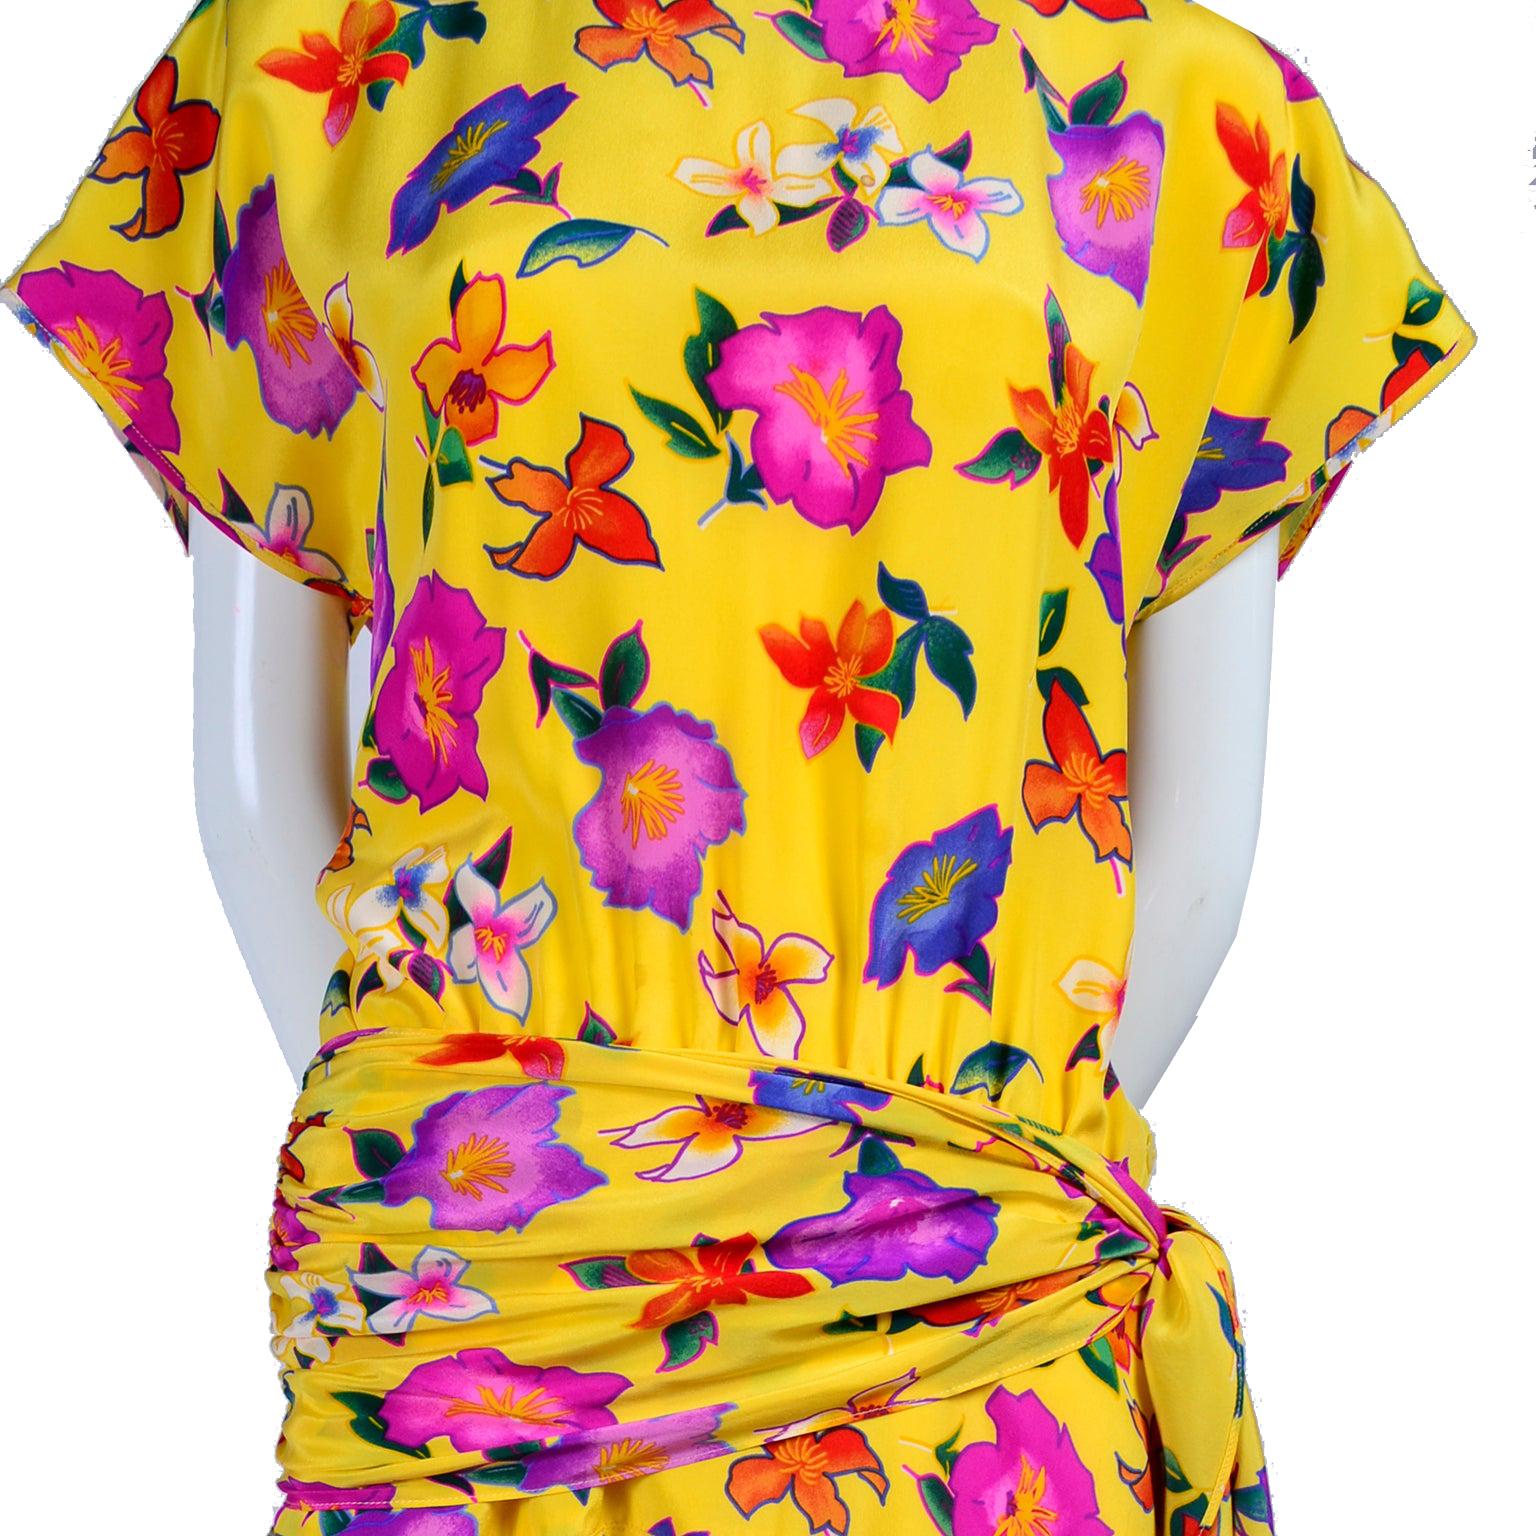 Women's Vintage Escada Dress in a Yellow Floral Silk Print by Margaretha Ley Size 8/10 For Sale